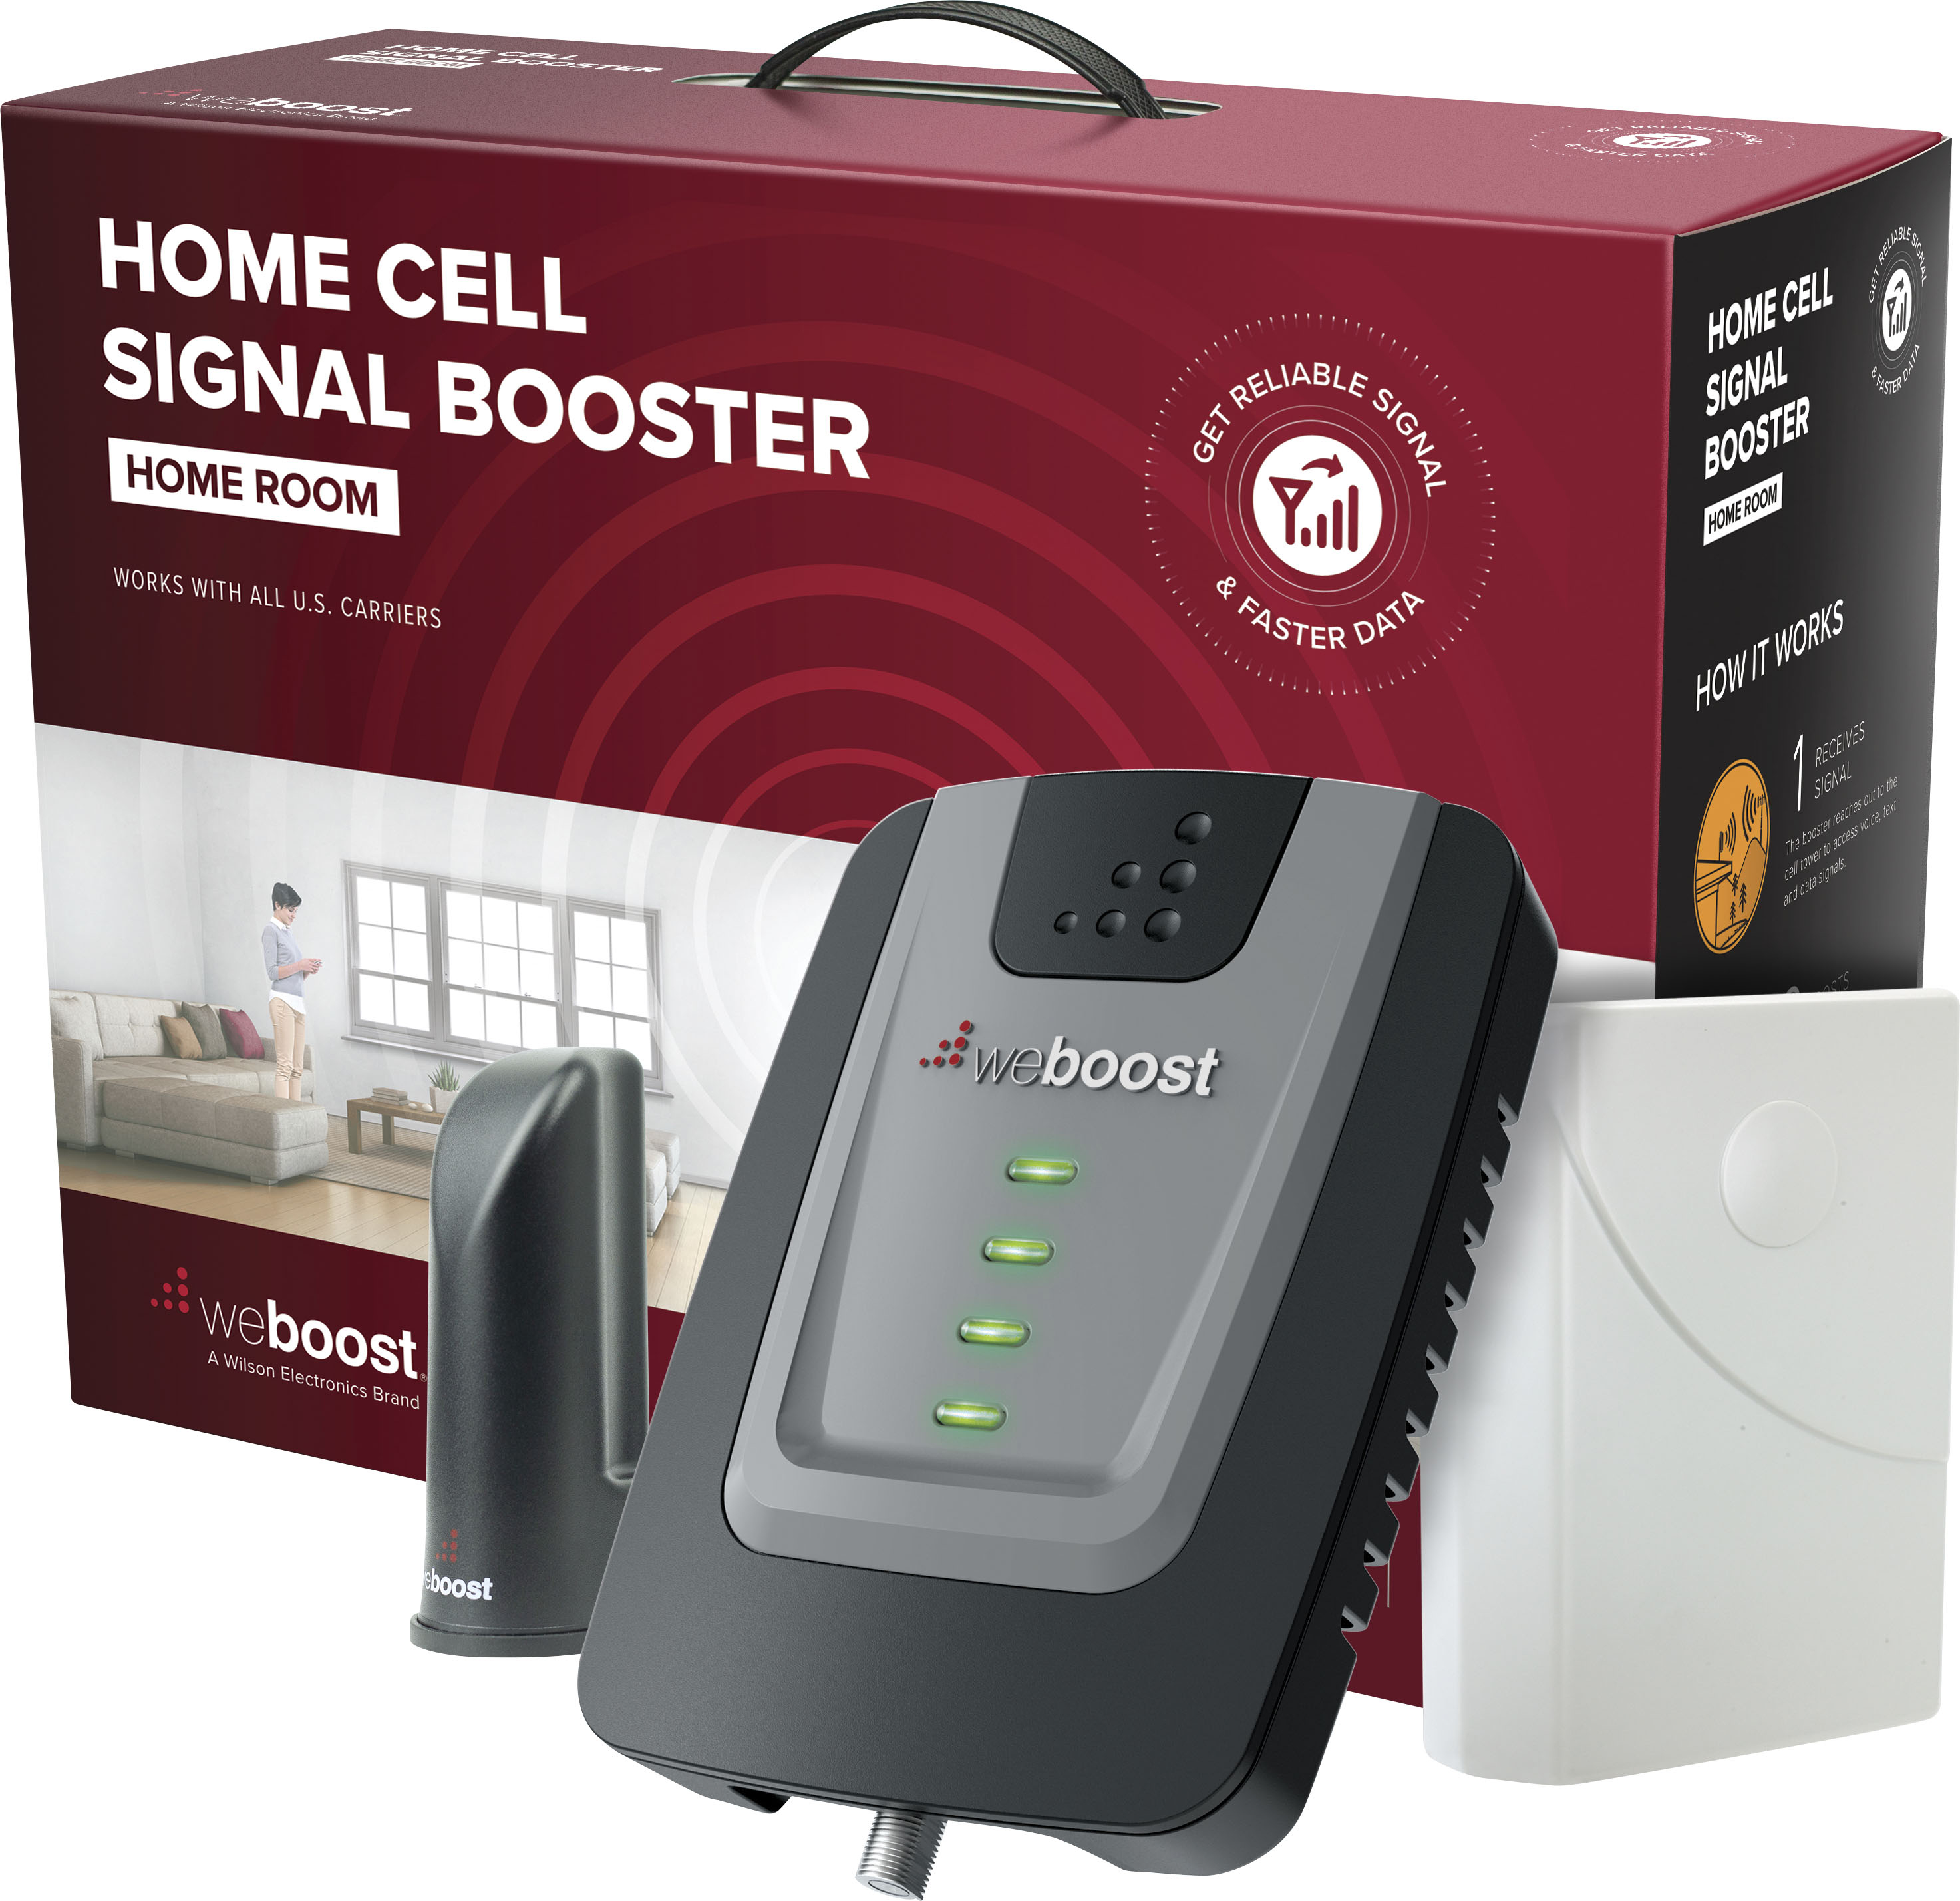 Angle View: weBoost Home Room, Cell Phone Signal Booster Kit for 1 Room, Boosts 4G LTE & 5G for all U.S. Carriers, FCC Approved (Model 472120)